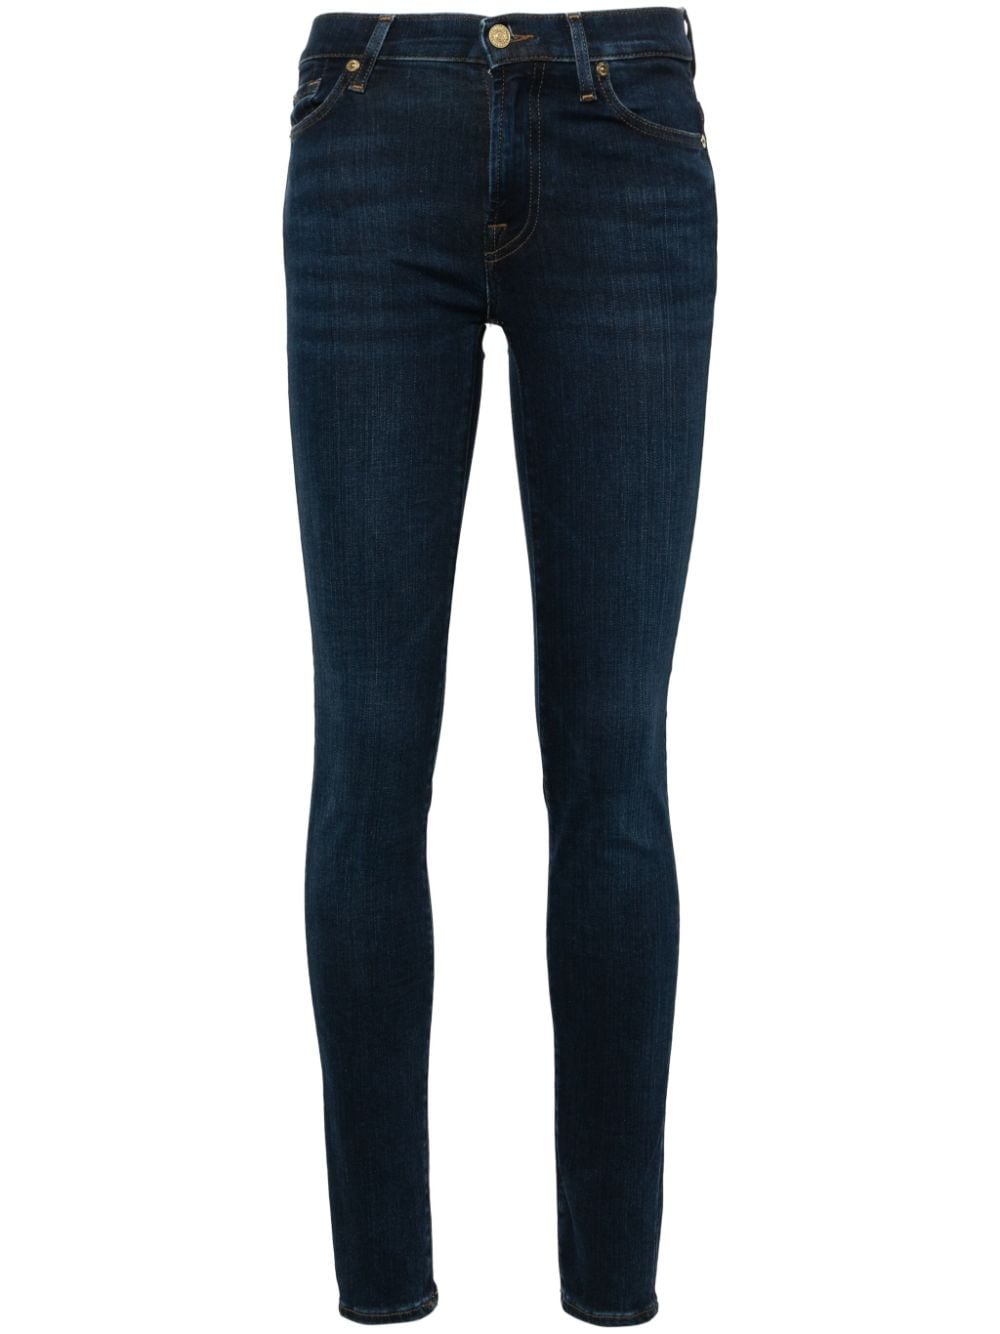 Shop 7 For All Mankind Hw High-rise Skinny Jeans In 蓝色